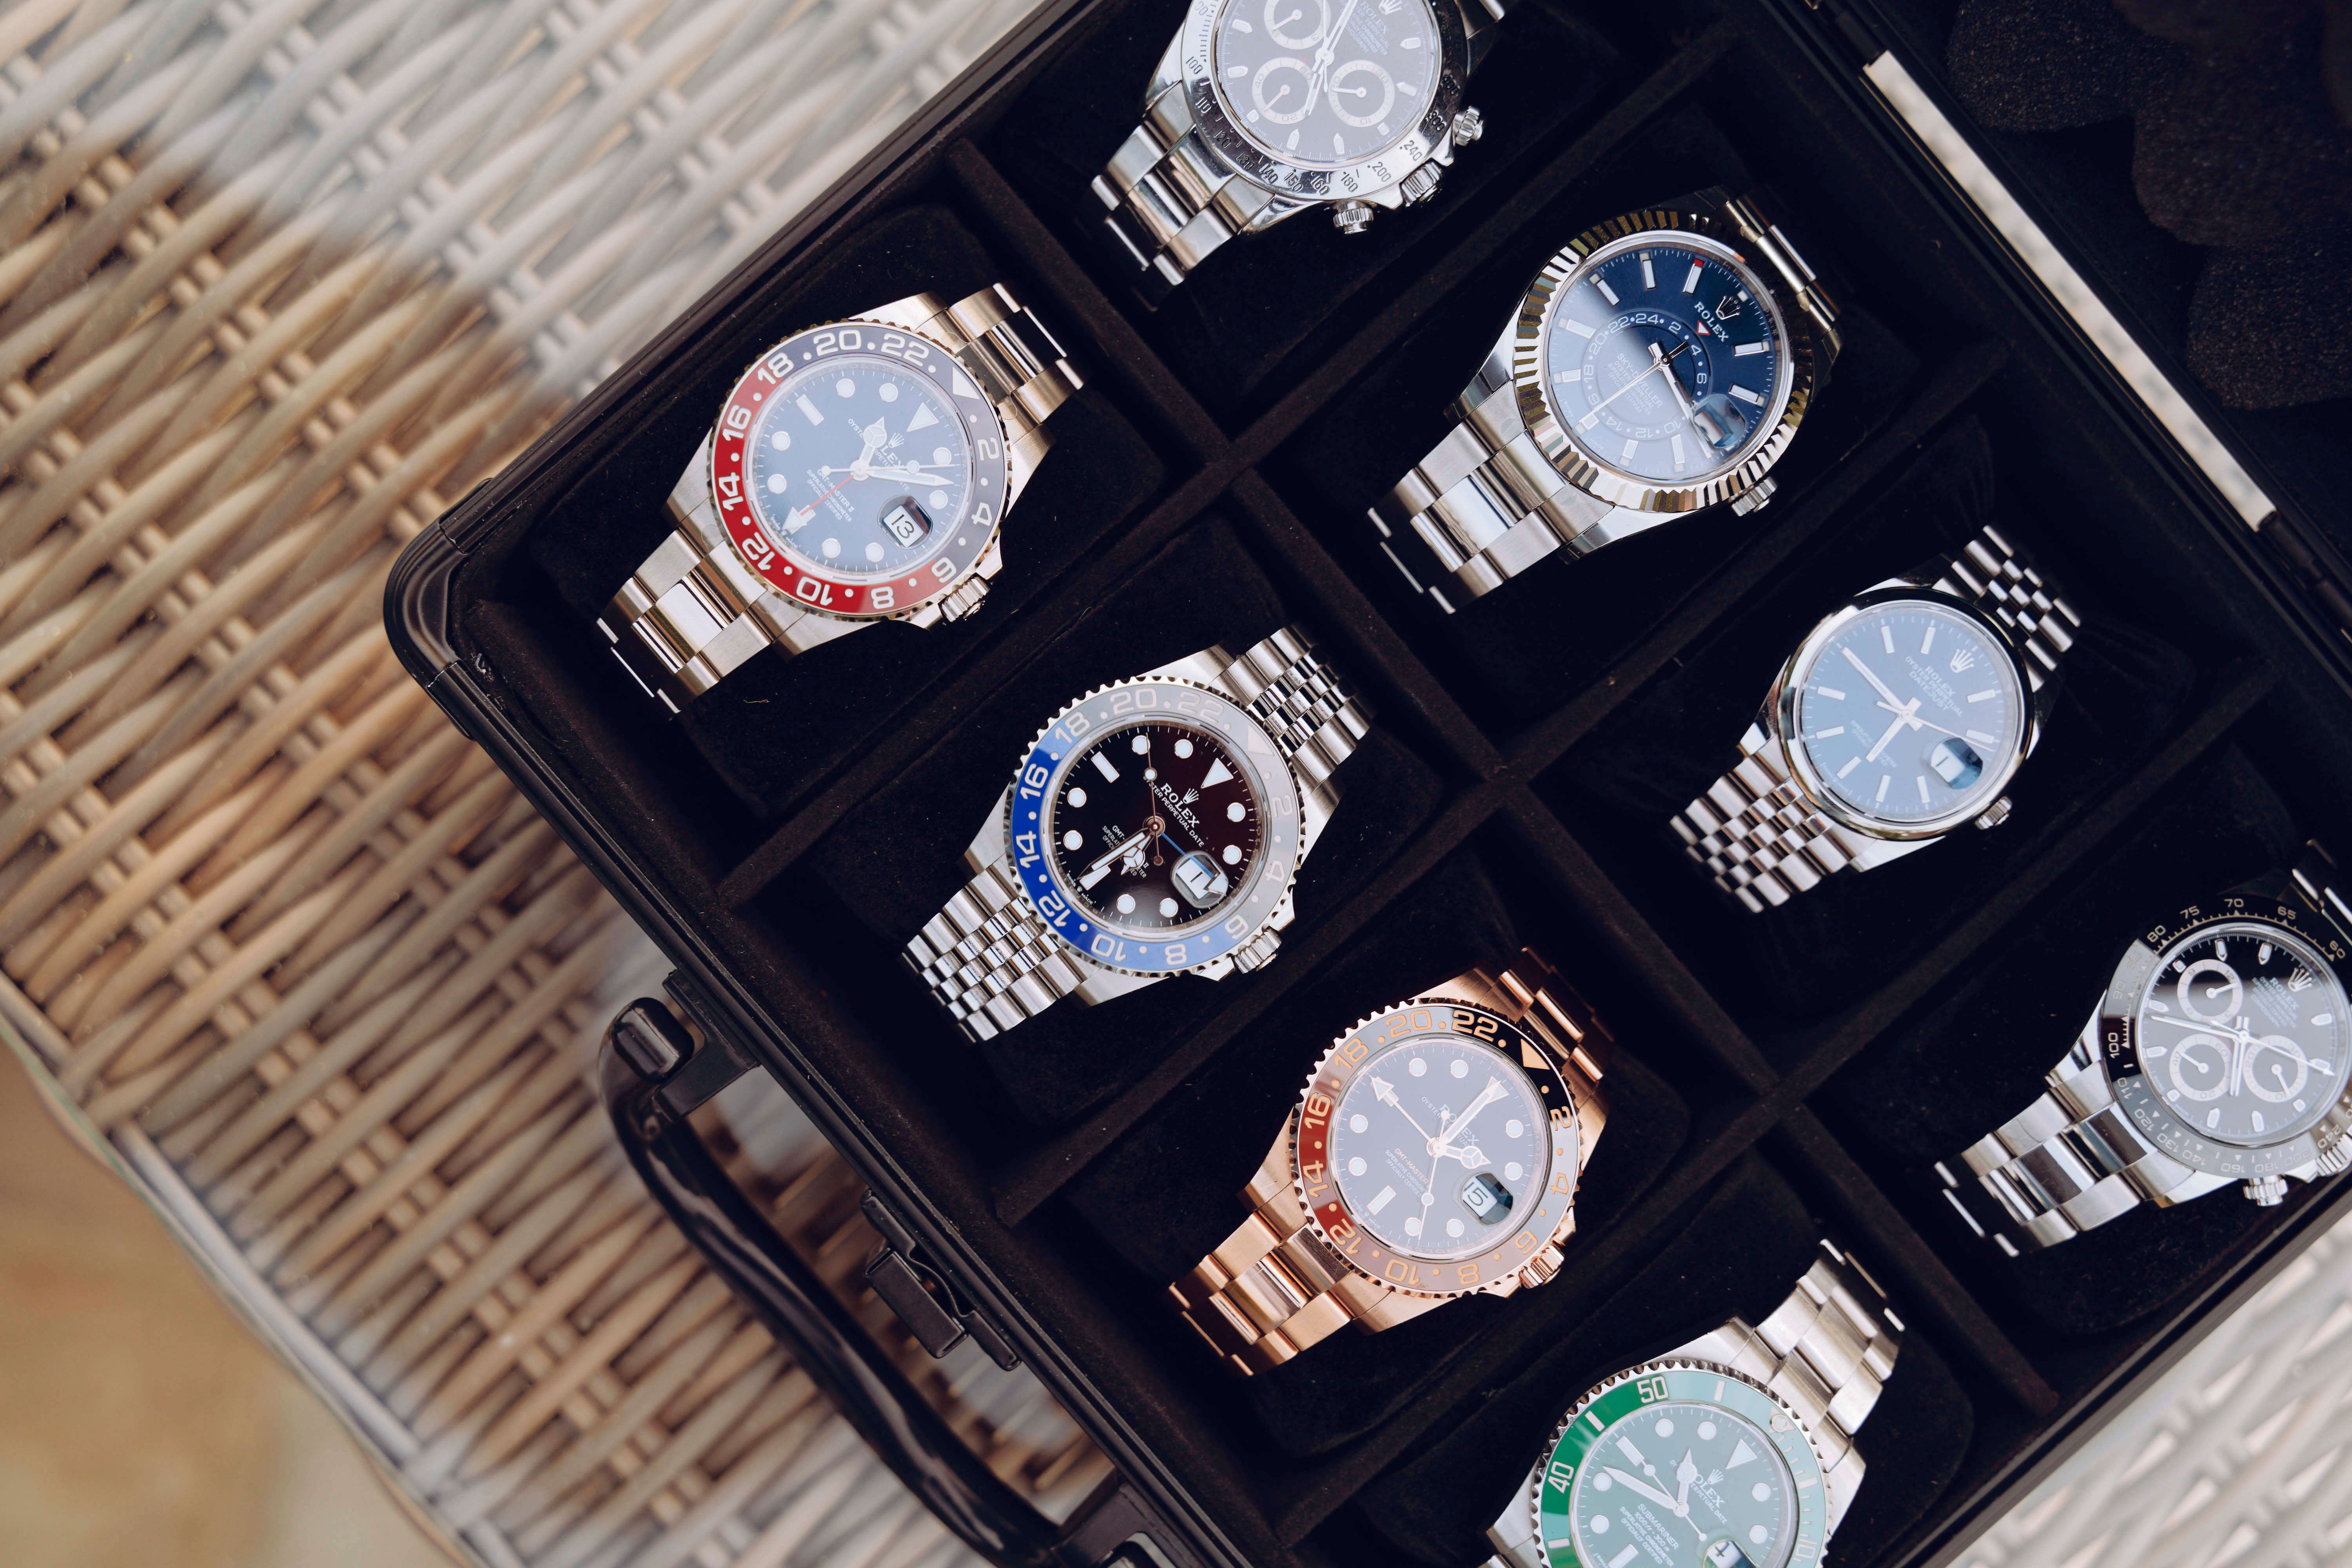 Rolex Yacht-Master II Ultimate Buying Guide